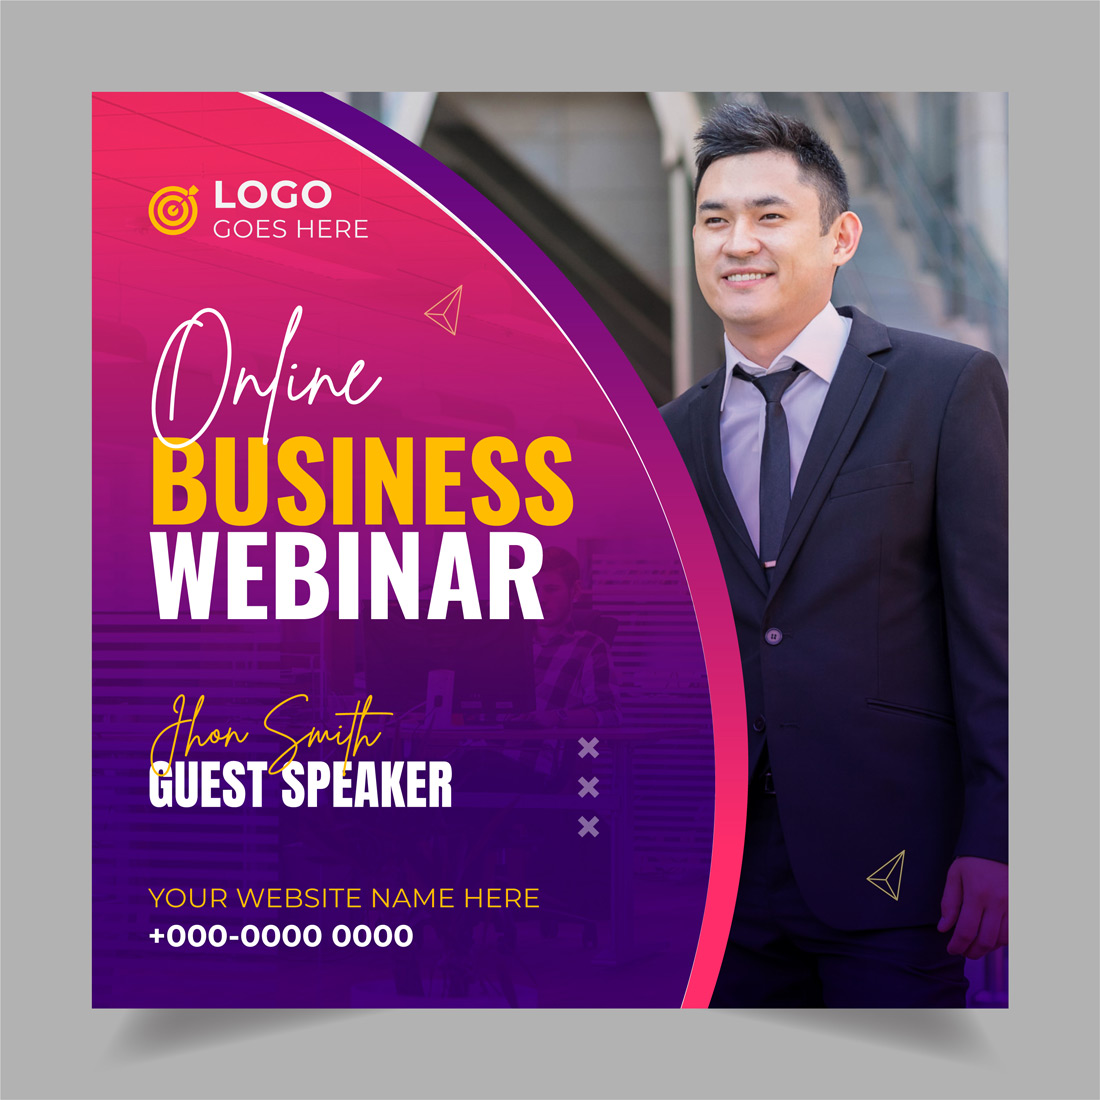 Man in a suit standing in front of a business webinar.